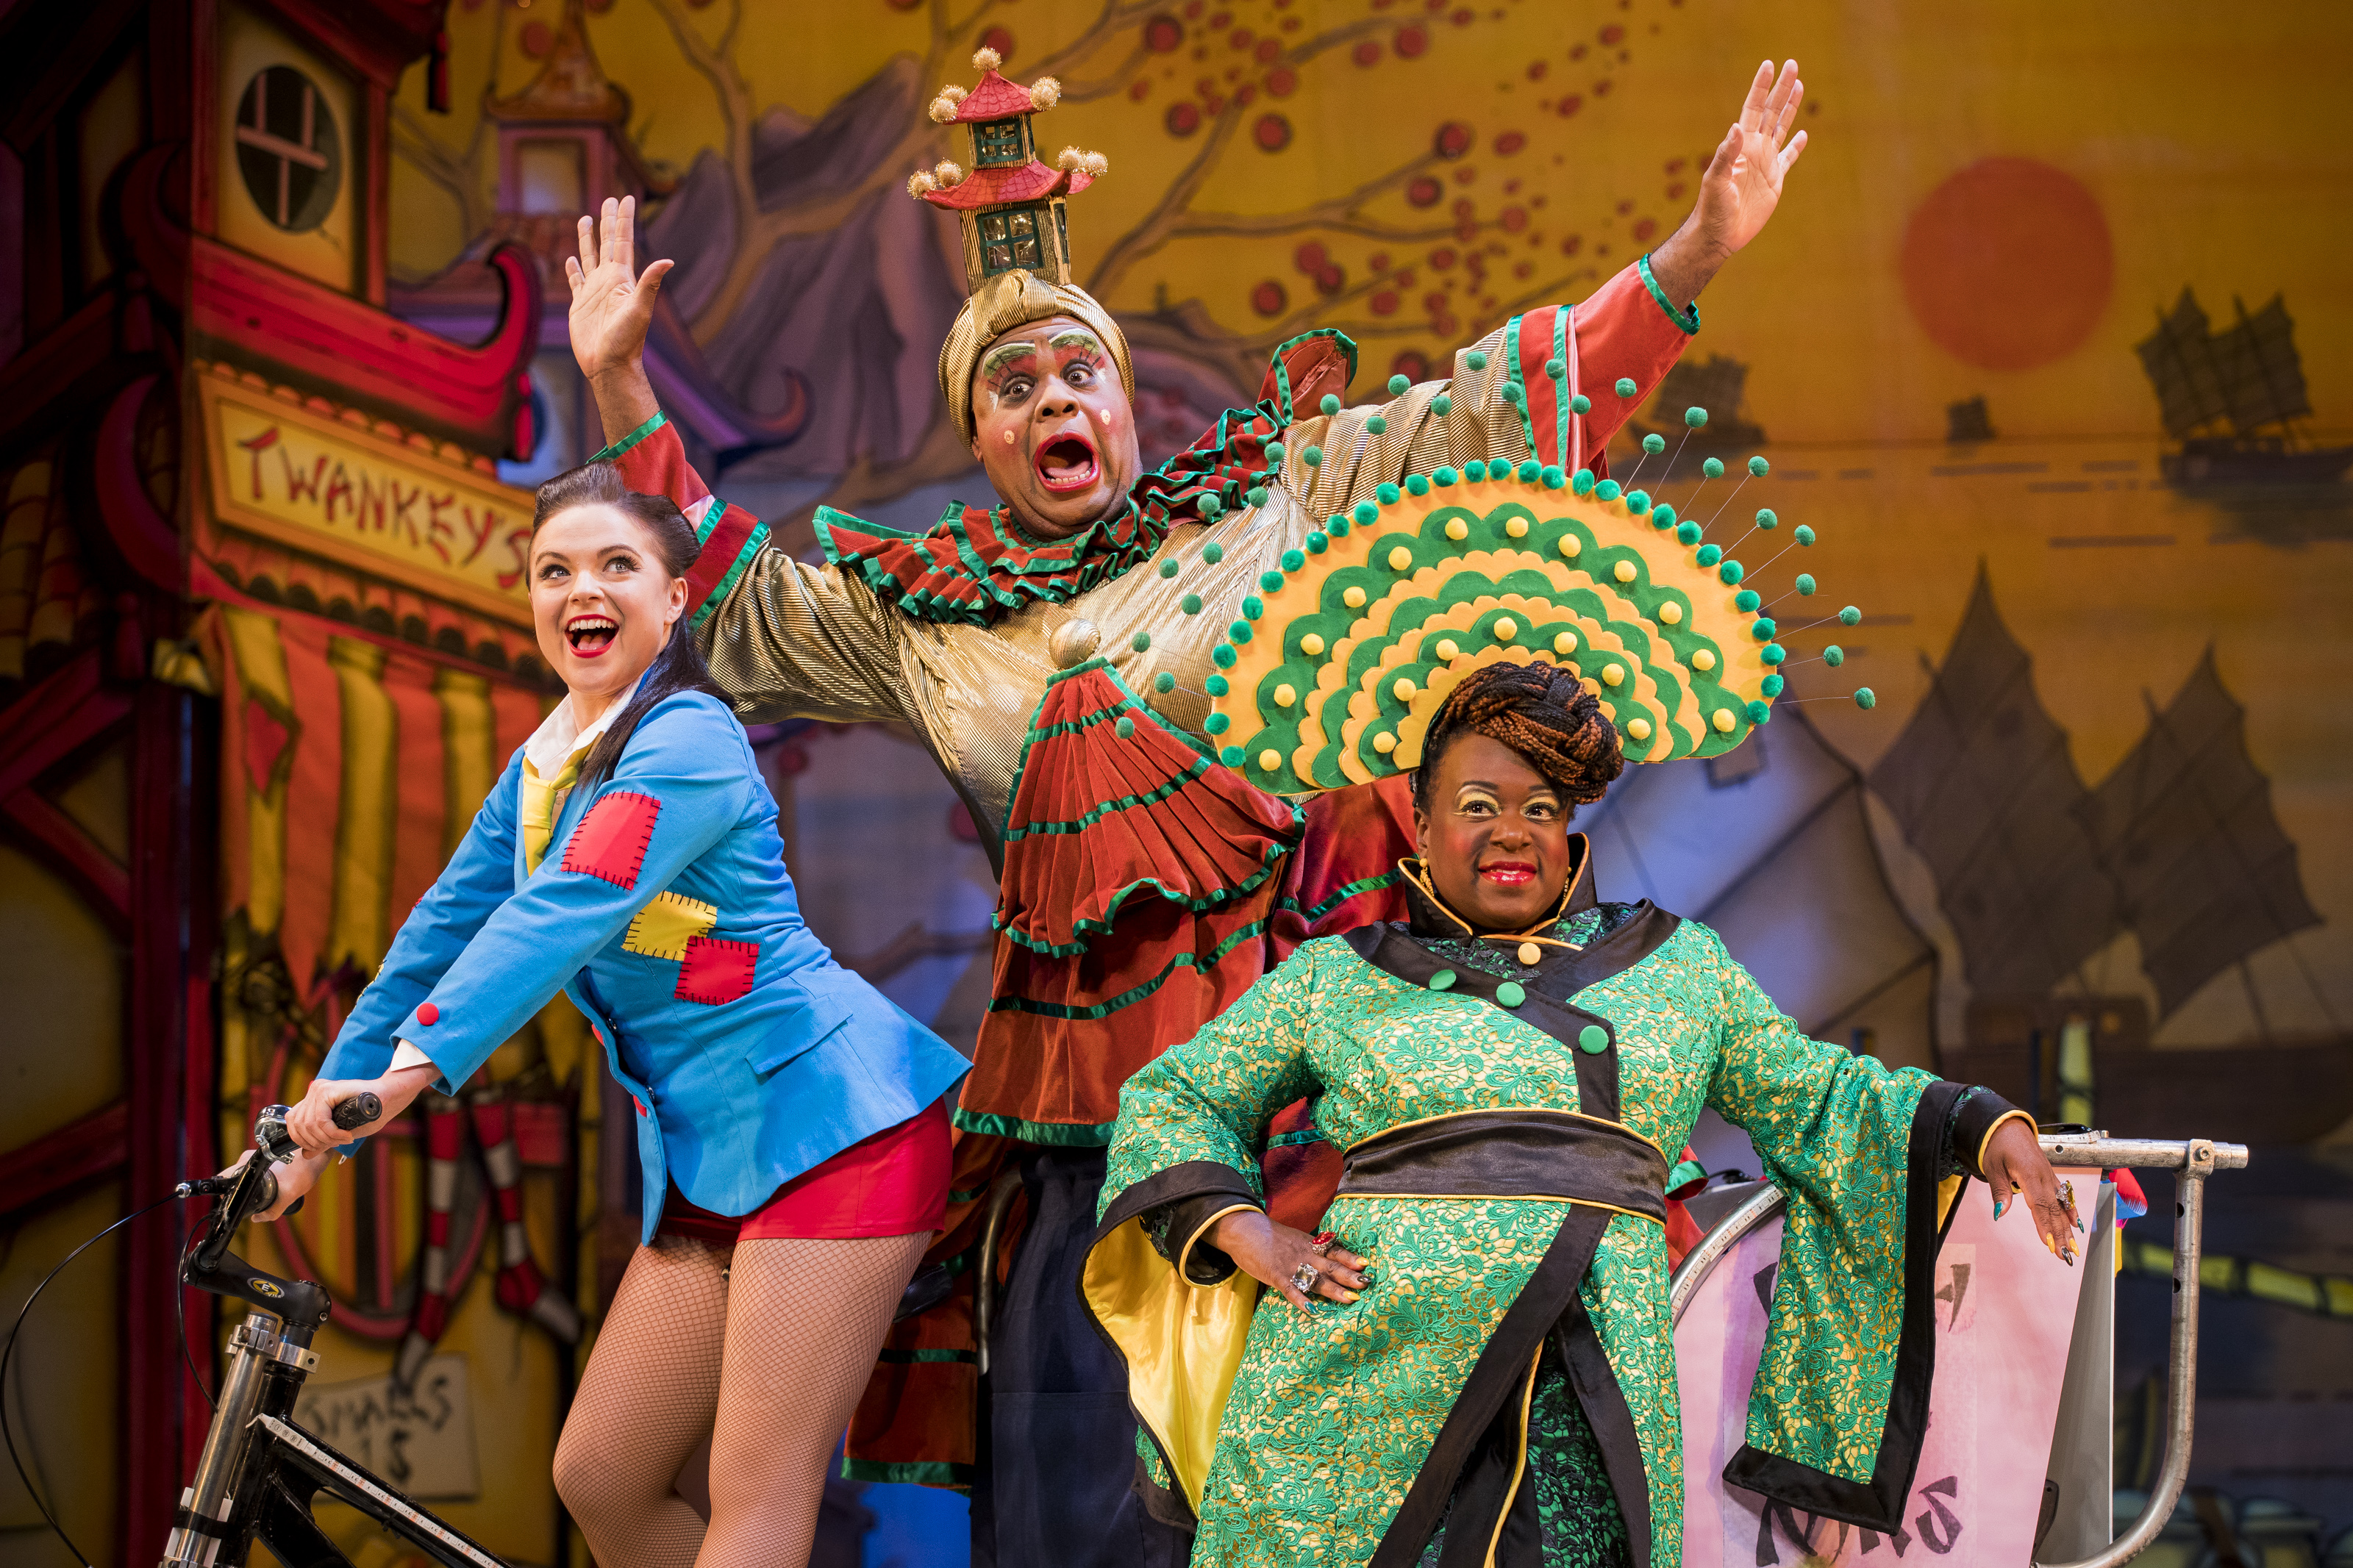 Gemma Sutton as Aladdin, Clive Rowe as Widow Twankey and Tameka Empson as The Empress in Aladdin. (Tristan Fewings/Getty Images)